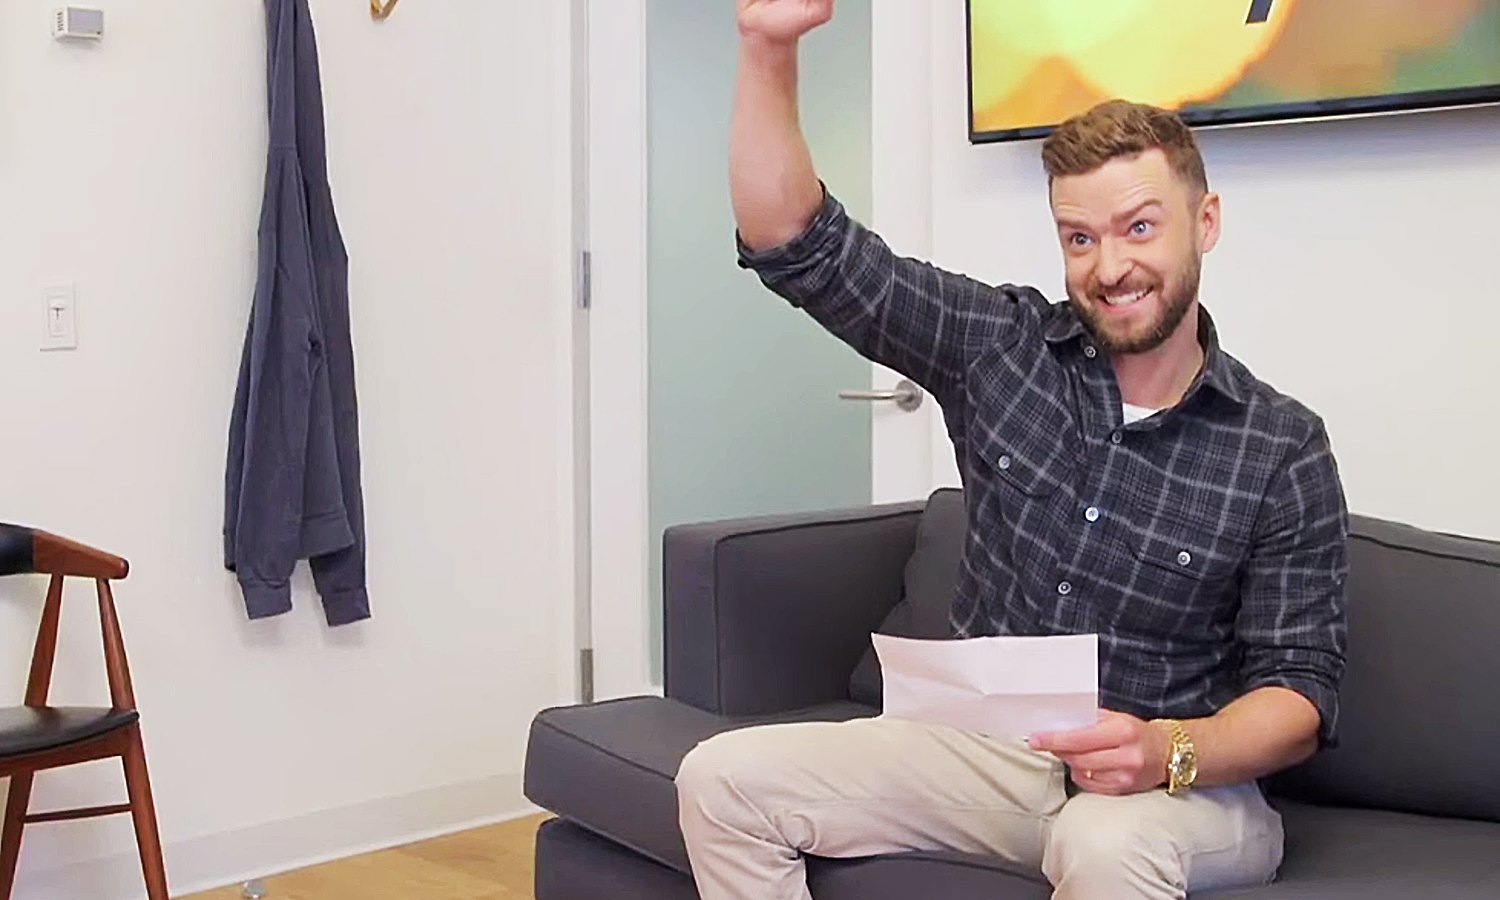 Justin Timberlake pitches theme song ideas to Seth Meyers